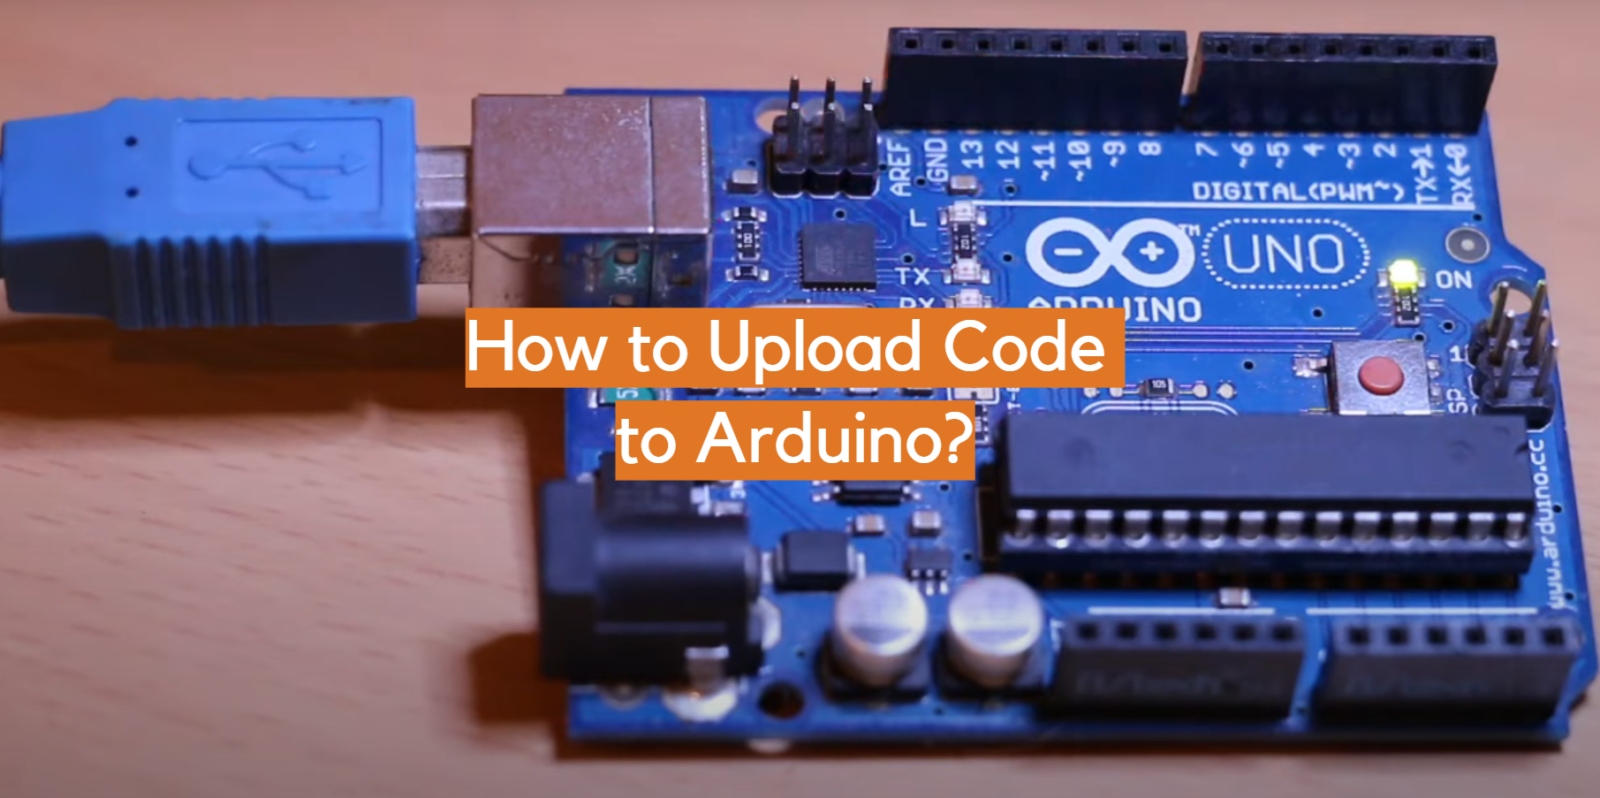 How to Upload Code to Arduino?